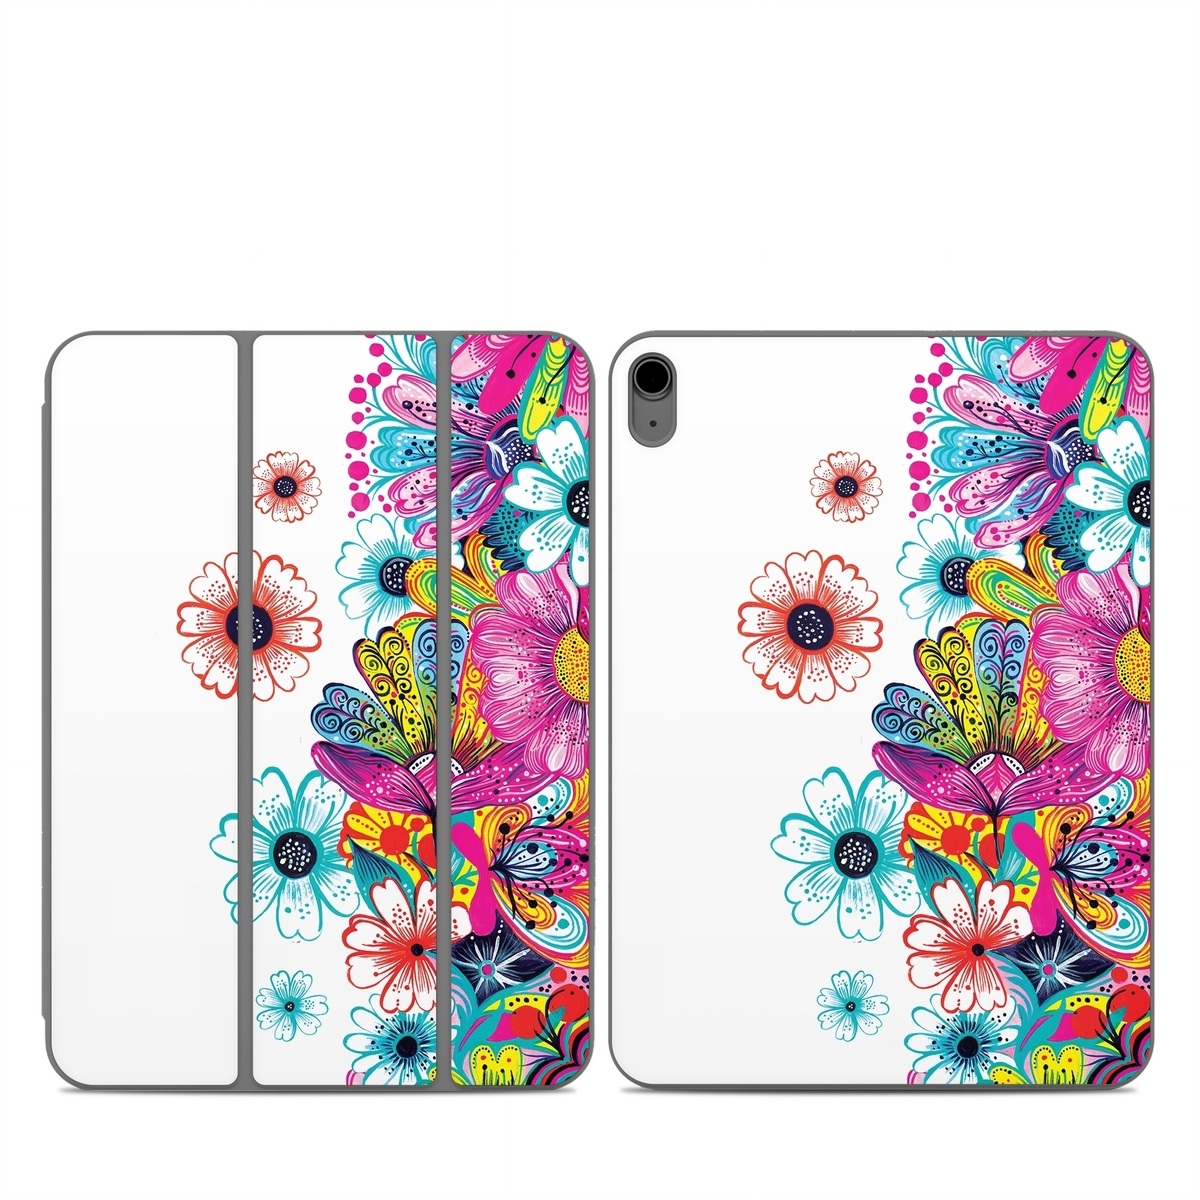  Skin design of Pattern, Floral design, Design, Graphic design, Flower, Wildflower, Plant, Graphics, Clip art, Visual arts, with white, pink, blue, yellow, purple, red colors